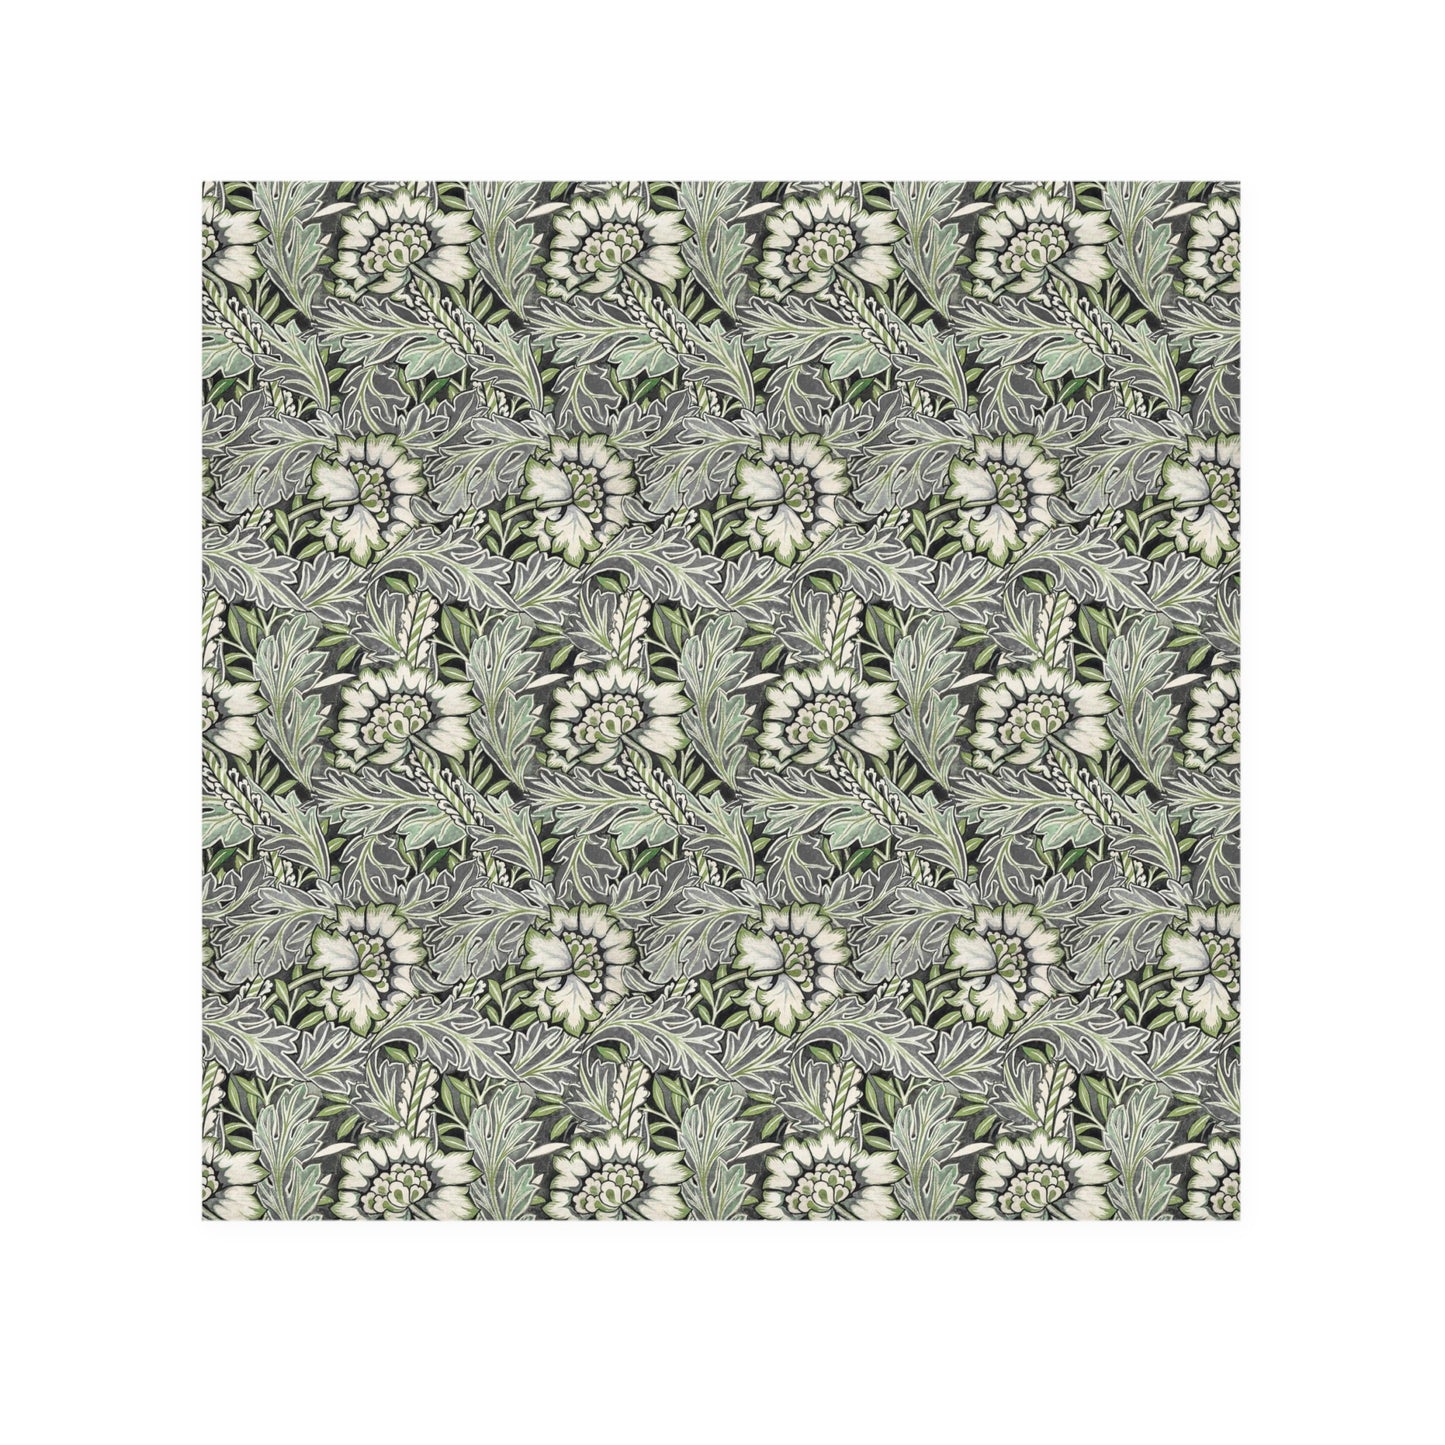 william-morris-co-face-cloth-anemone-collection-grey-3